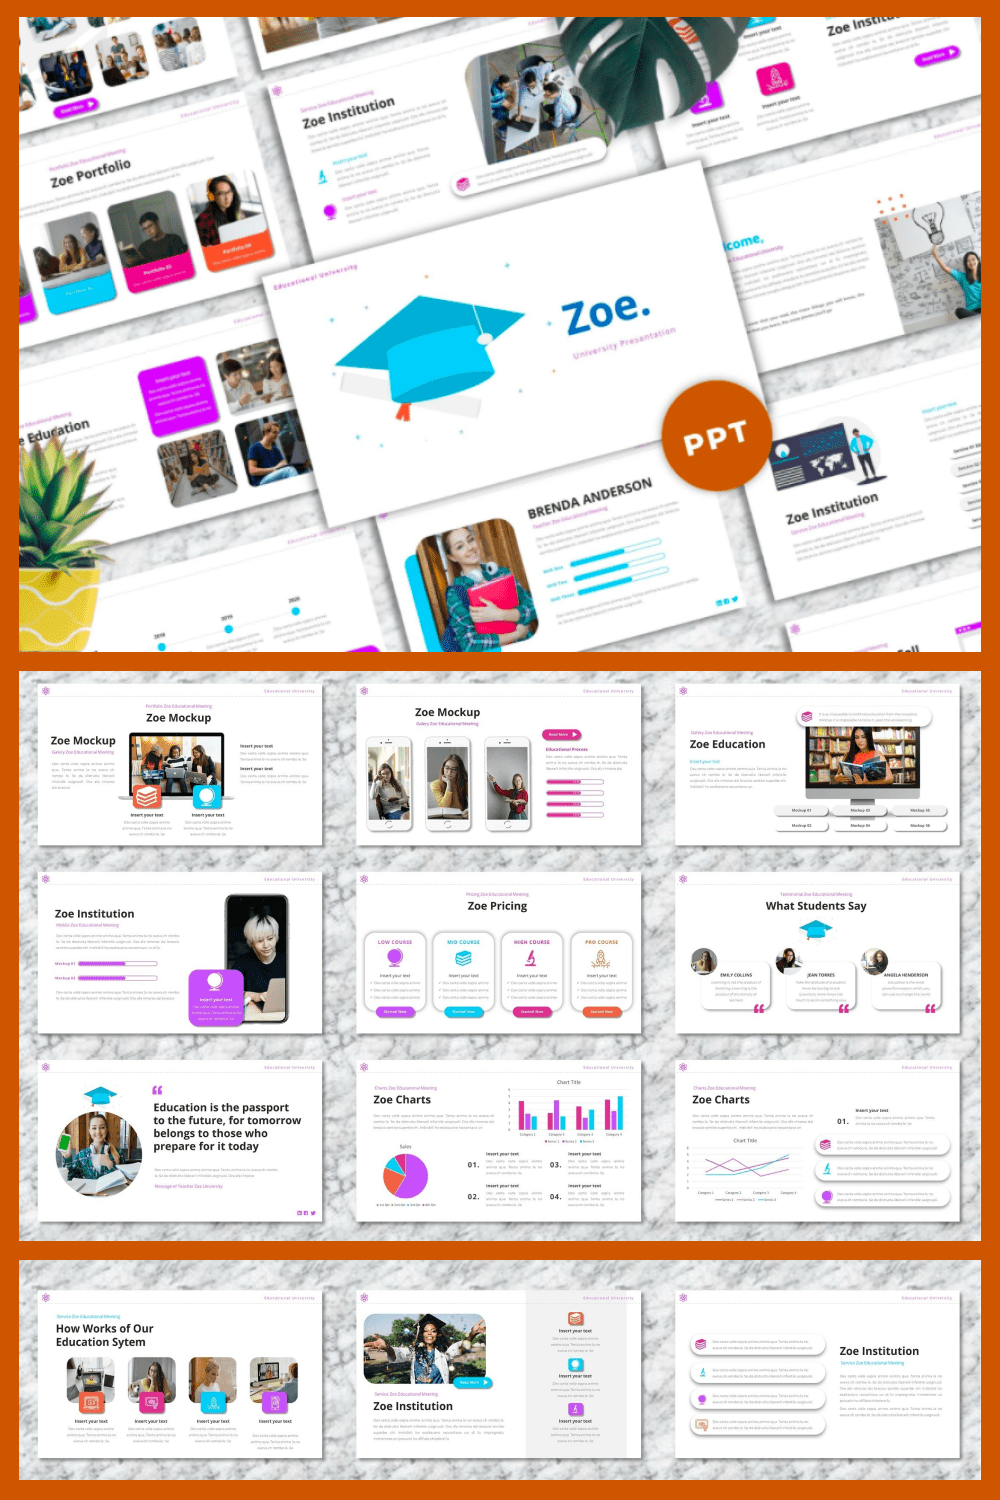 The template is light with bright elements and a lot of infographics.